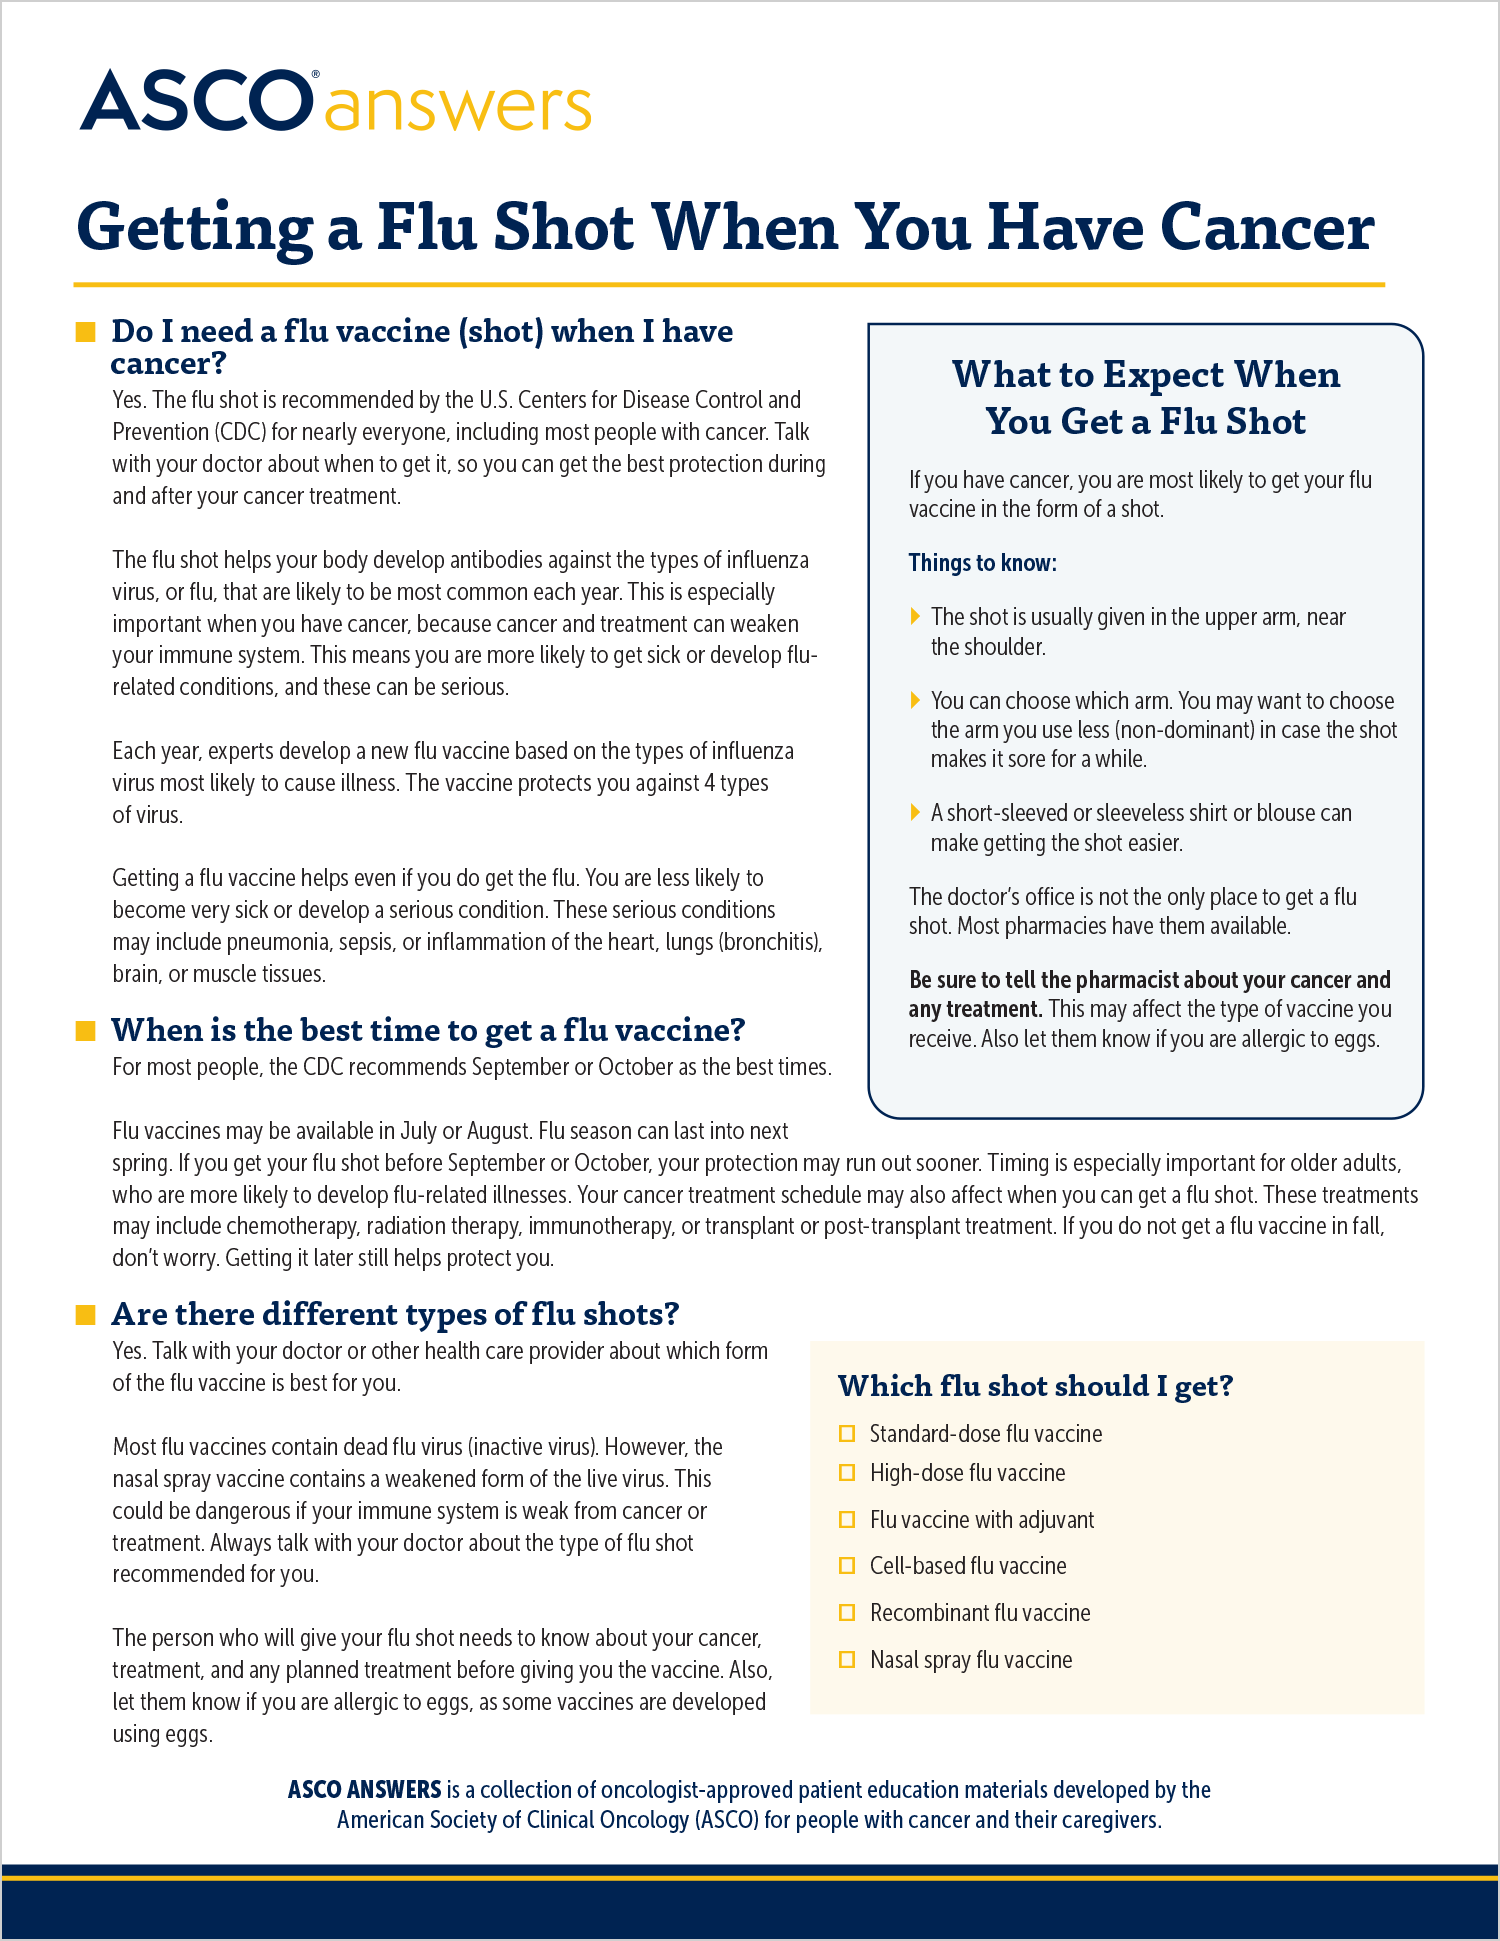 Getting a Flu Shot When You Have Cancer fact sheet